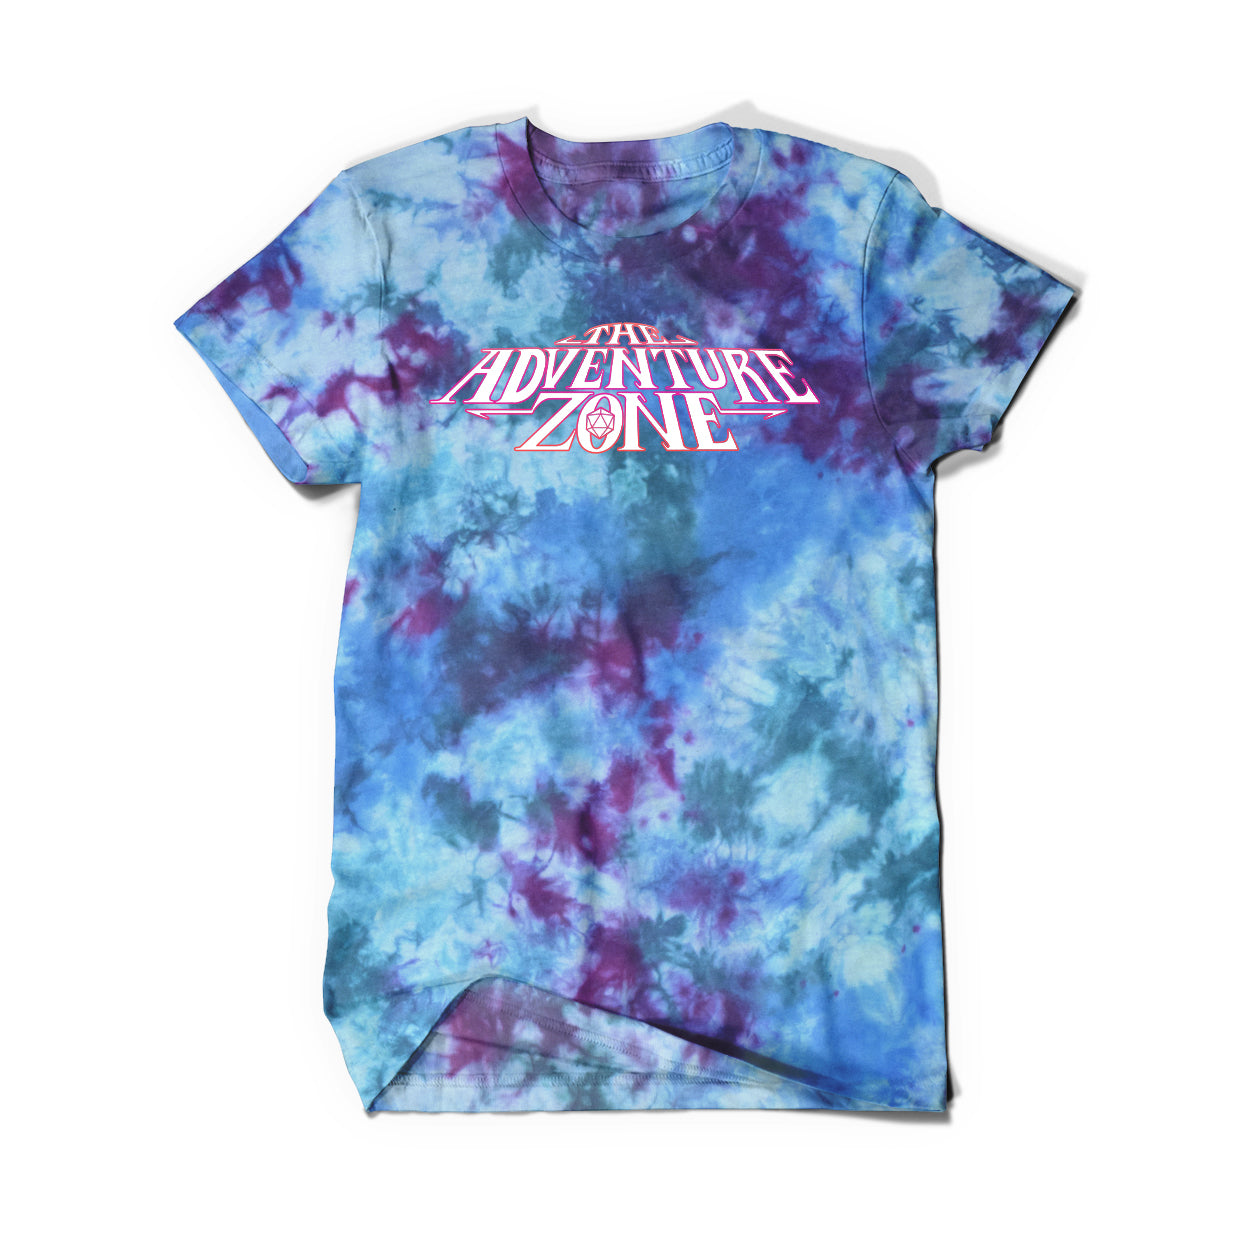 A blue and indigo tie-dye shirt that says, "The Adventure Zone" in white and pink.